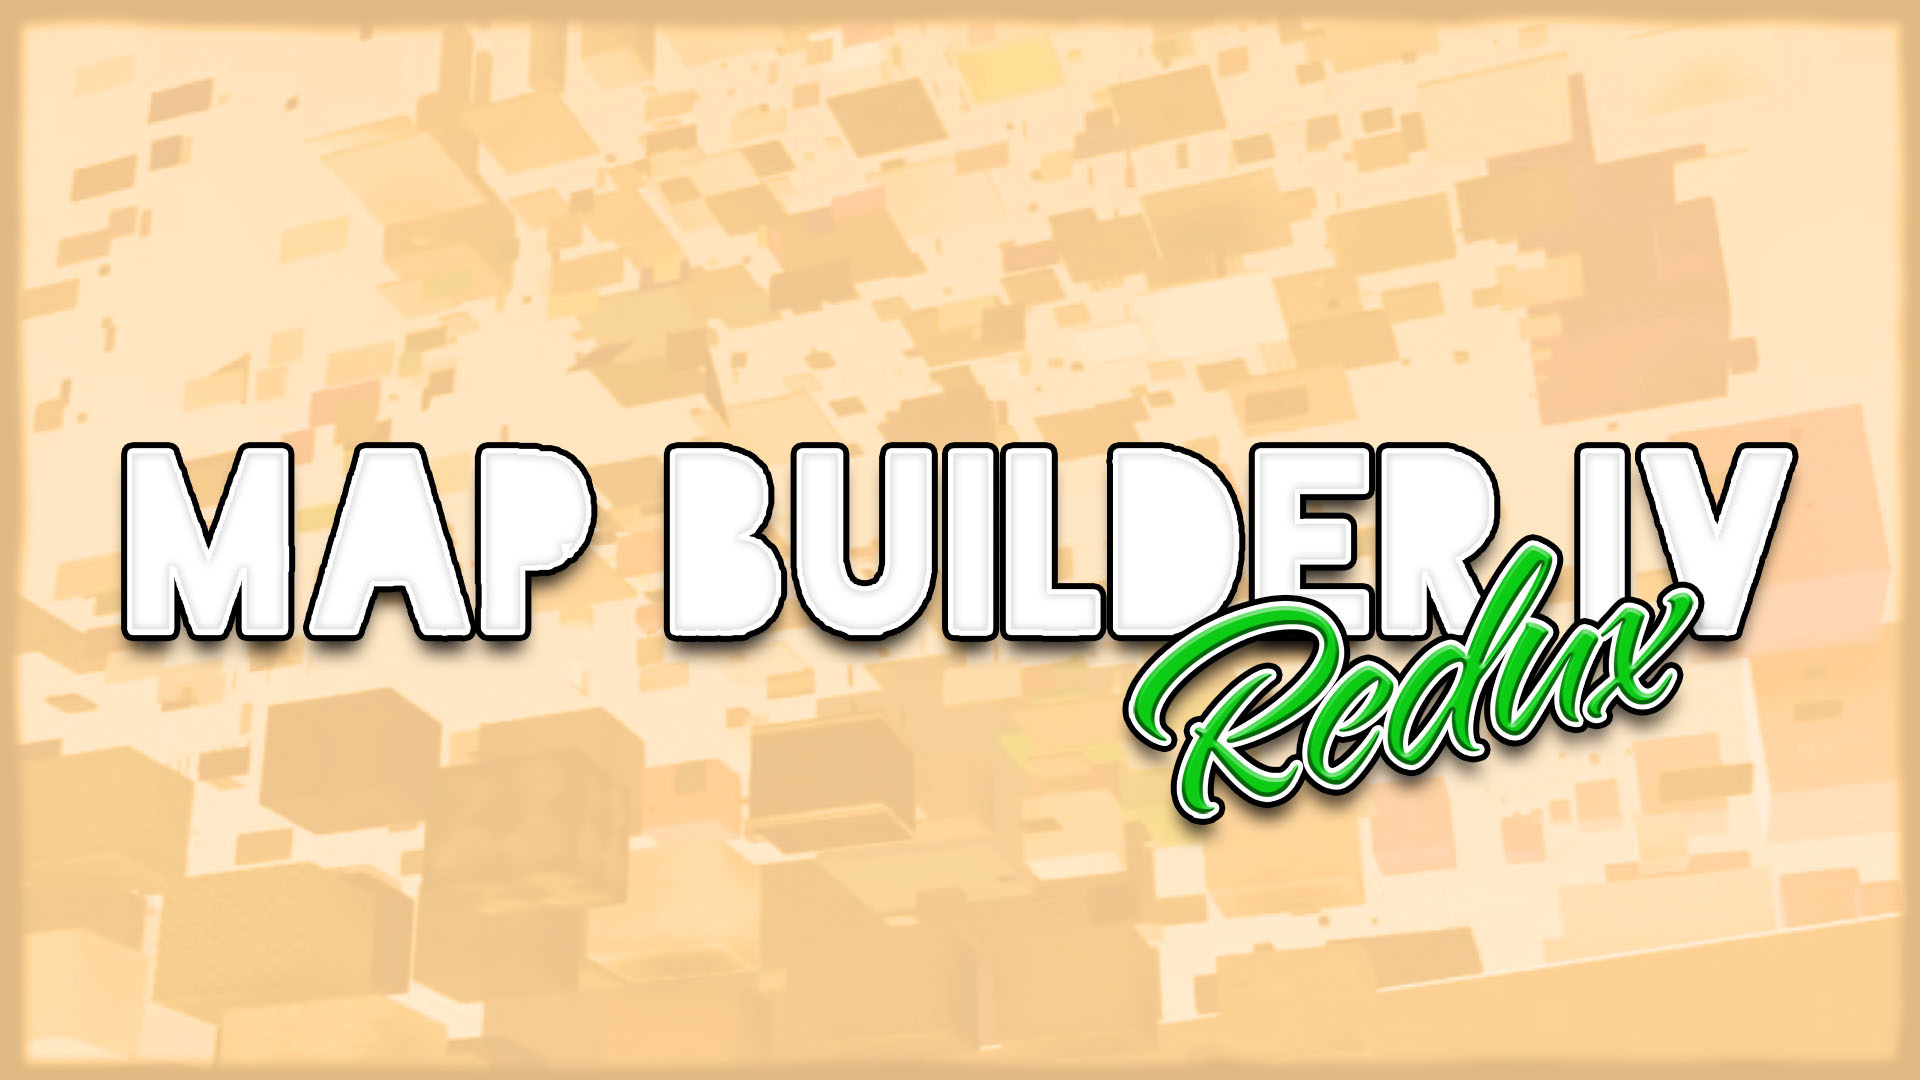 Map builder discovery. Map Builder. Builder's Patch.